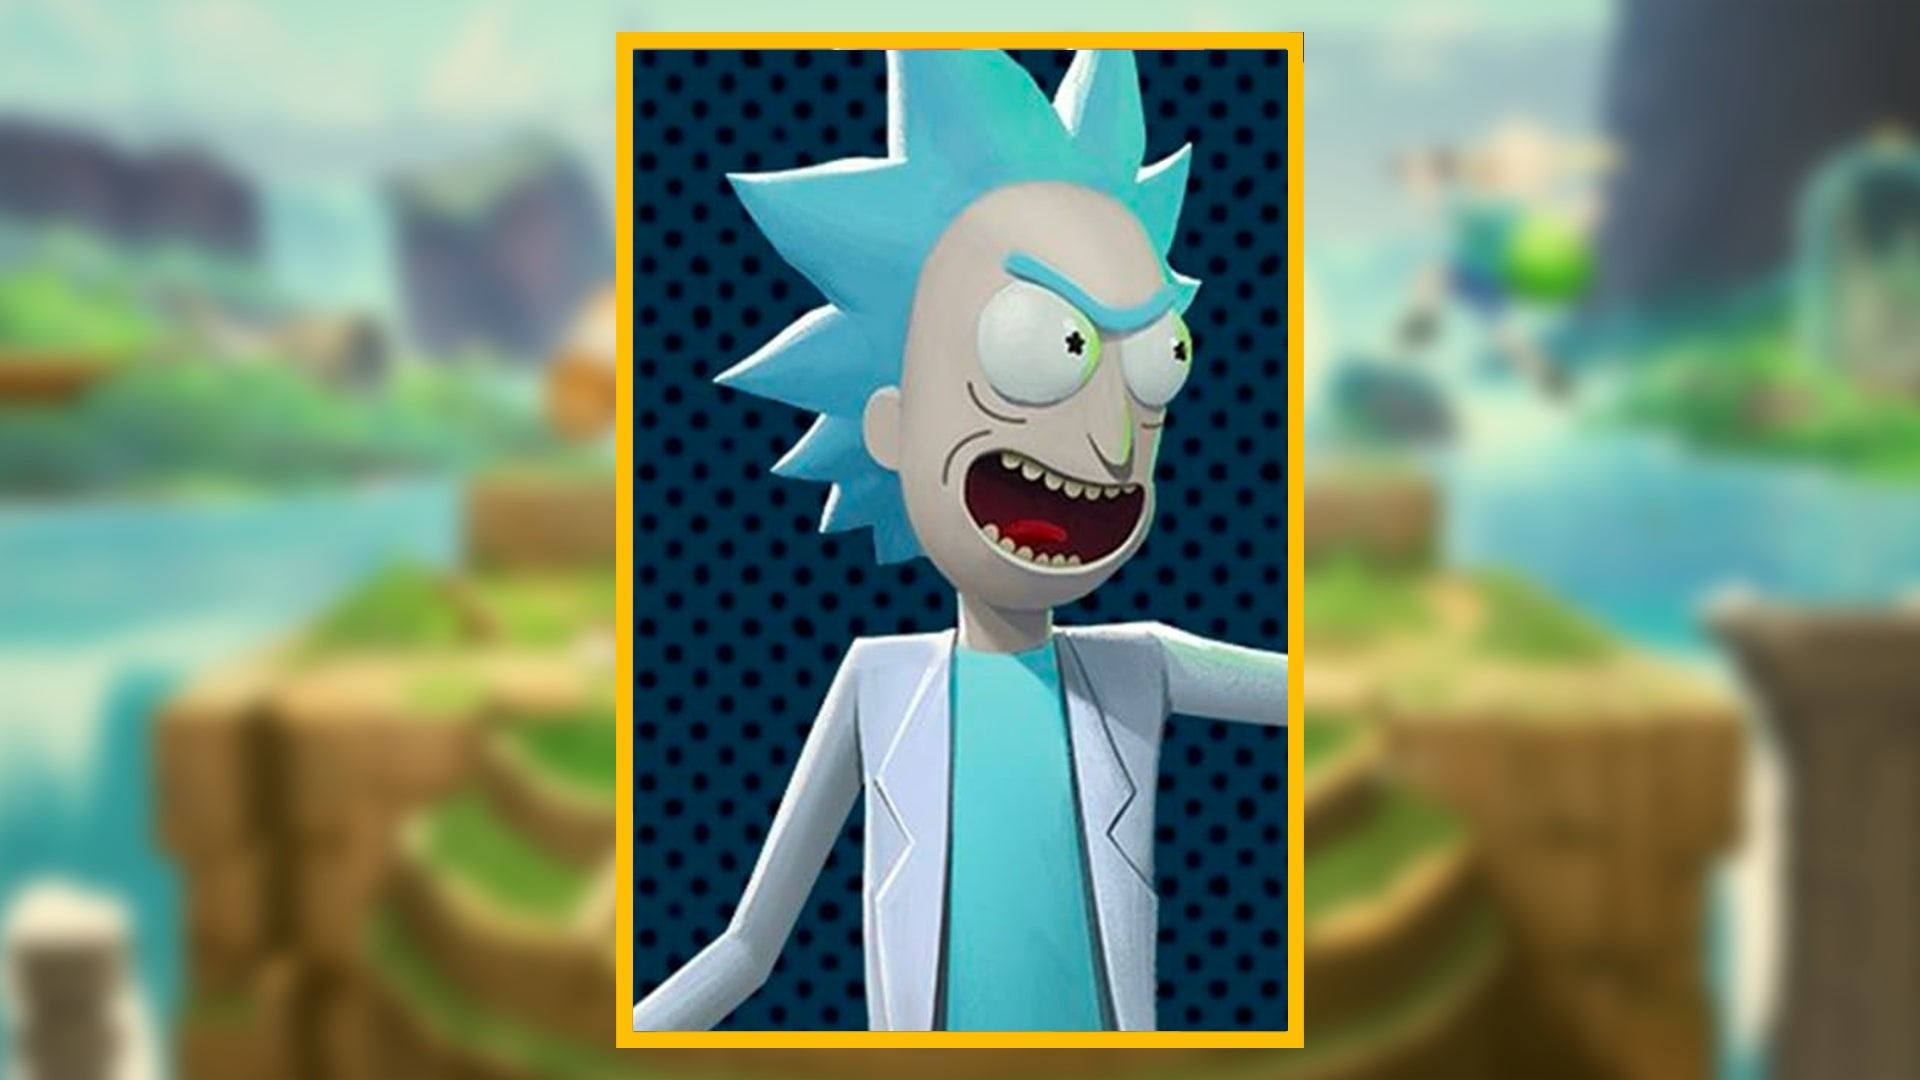 MultiVersus is a licensed brawler based on Warner Bros. intellectual properties. Rick And Morty's Rick Sanchez will be one of its fighters.